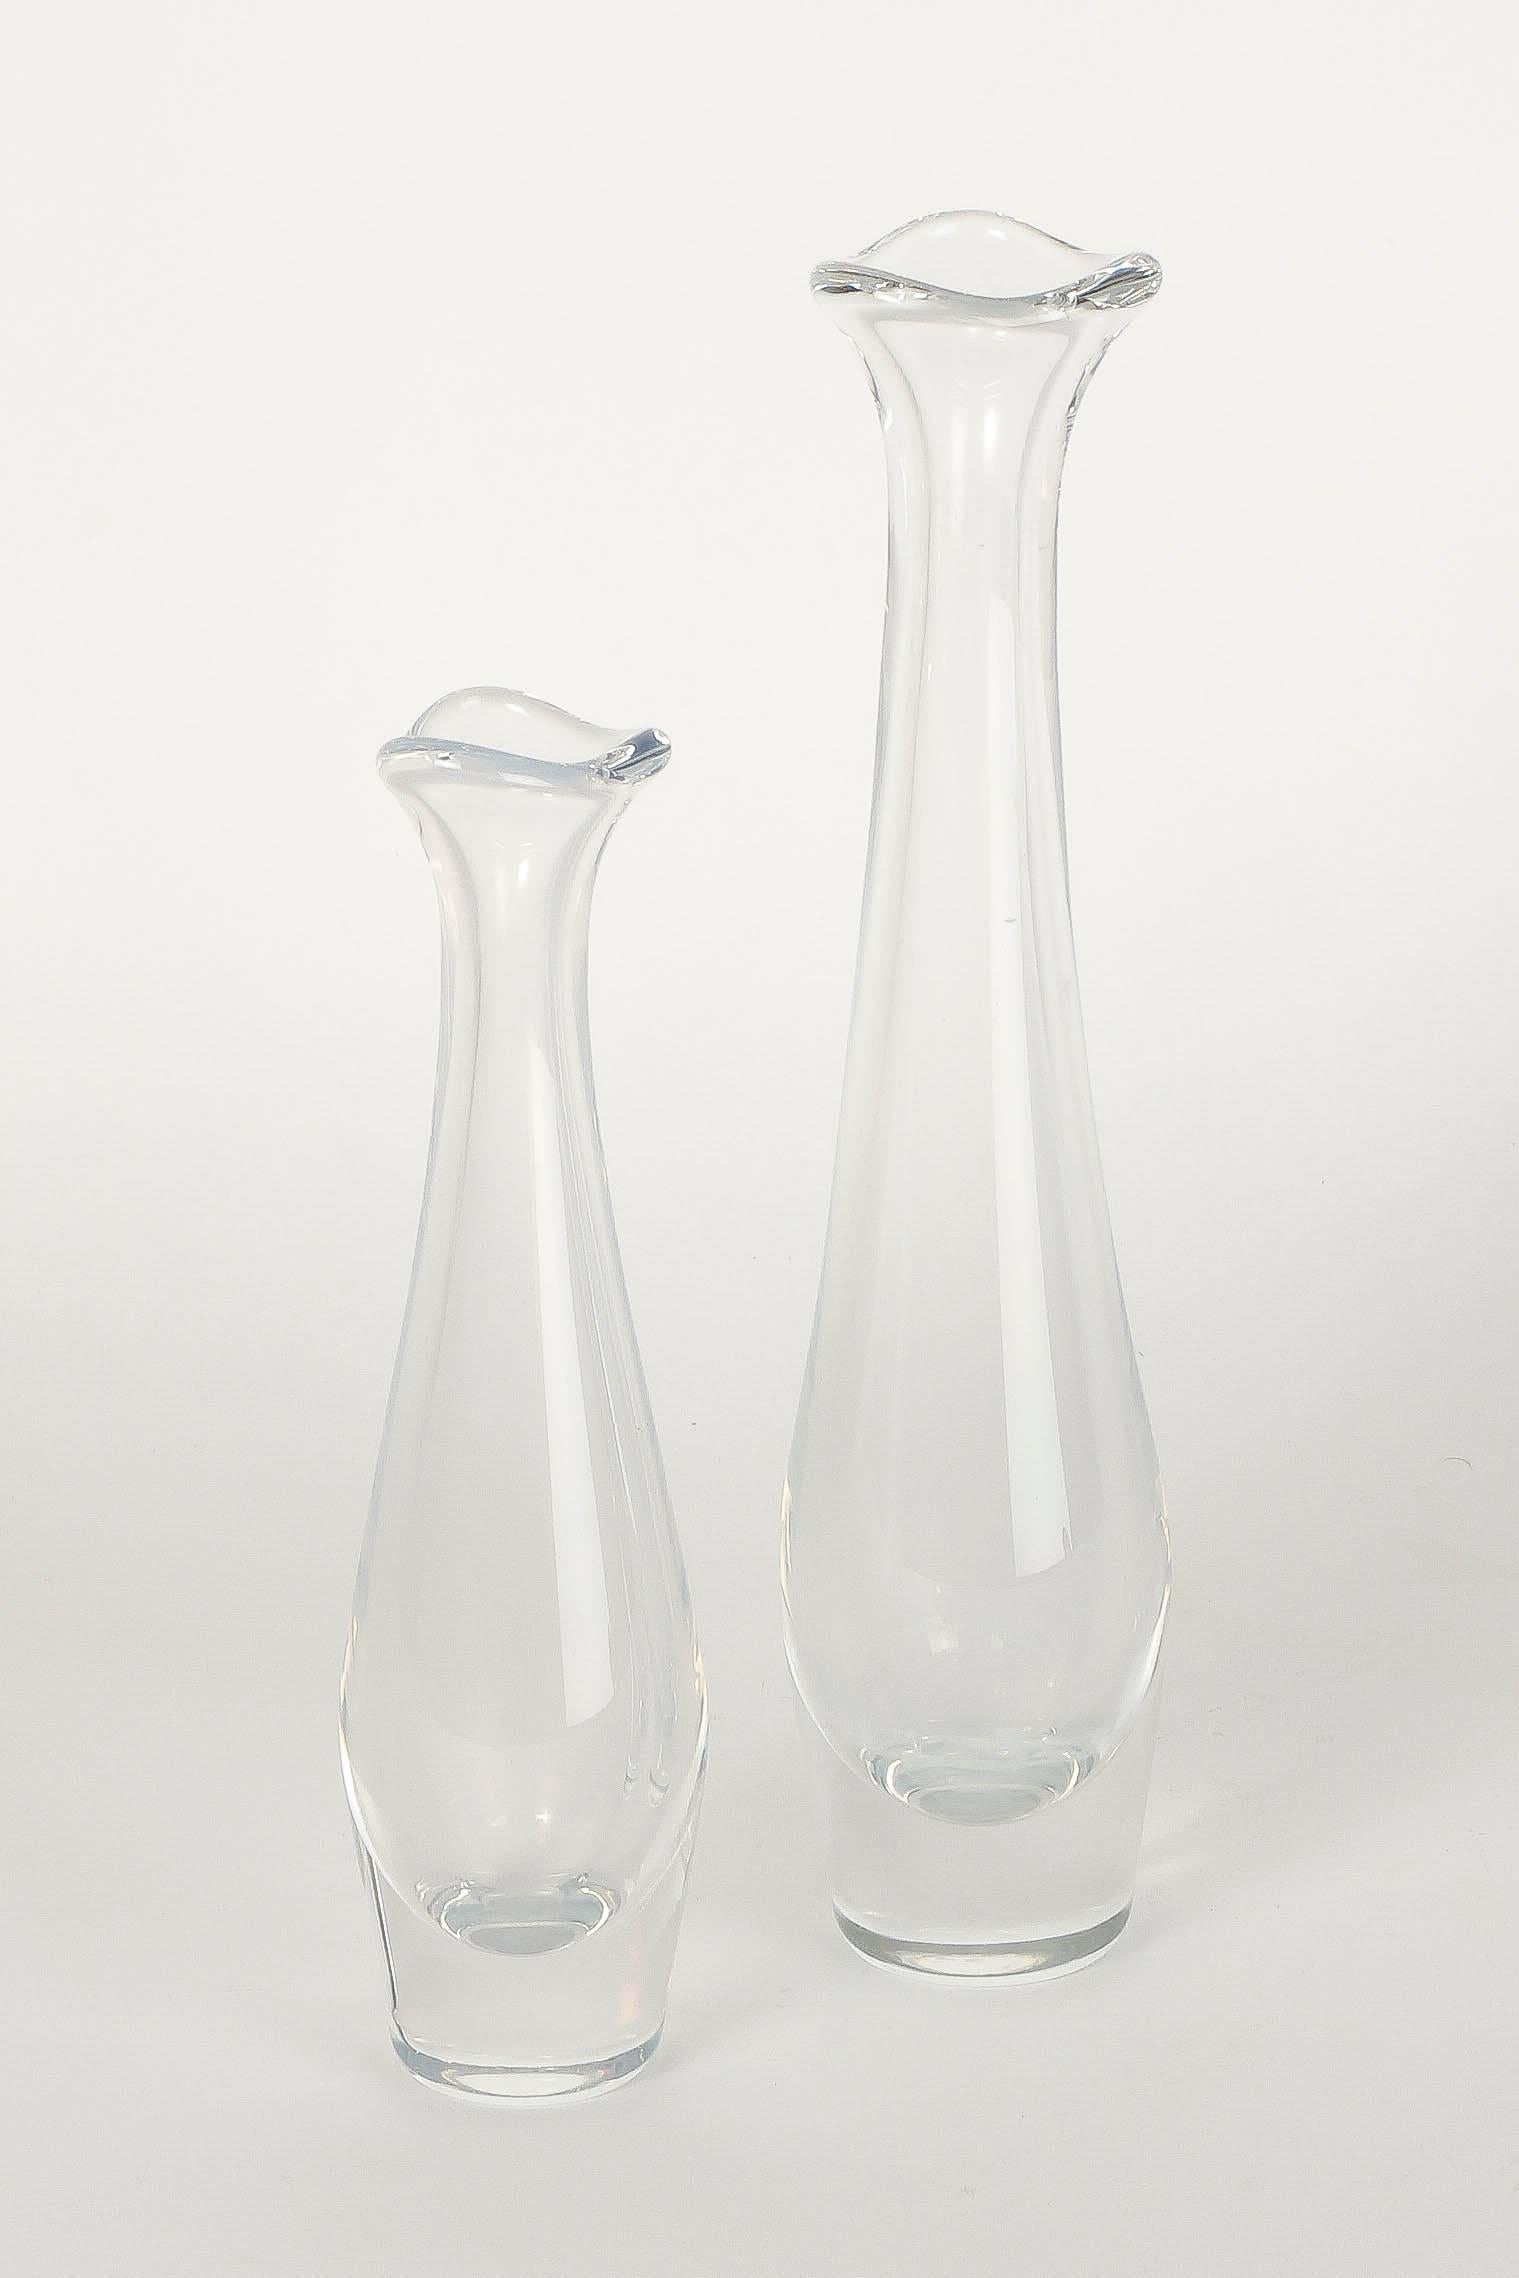 Pair of Sven Palmqvist Selena vases, designed in 1947 and manufactured in the 1950s by Orrefors. Both vases are signed on the bottom with “Orrefors PU 3091/5” and “PU 3090/5.” Slightly opalescent glass.
Large vase:
Diameter 7cm.
Height